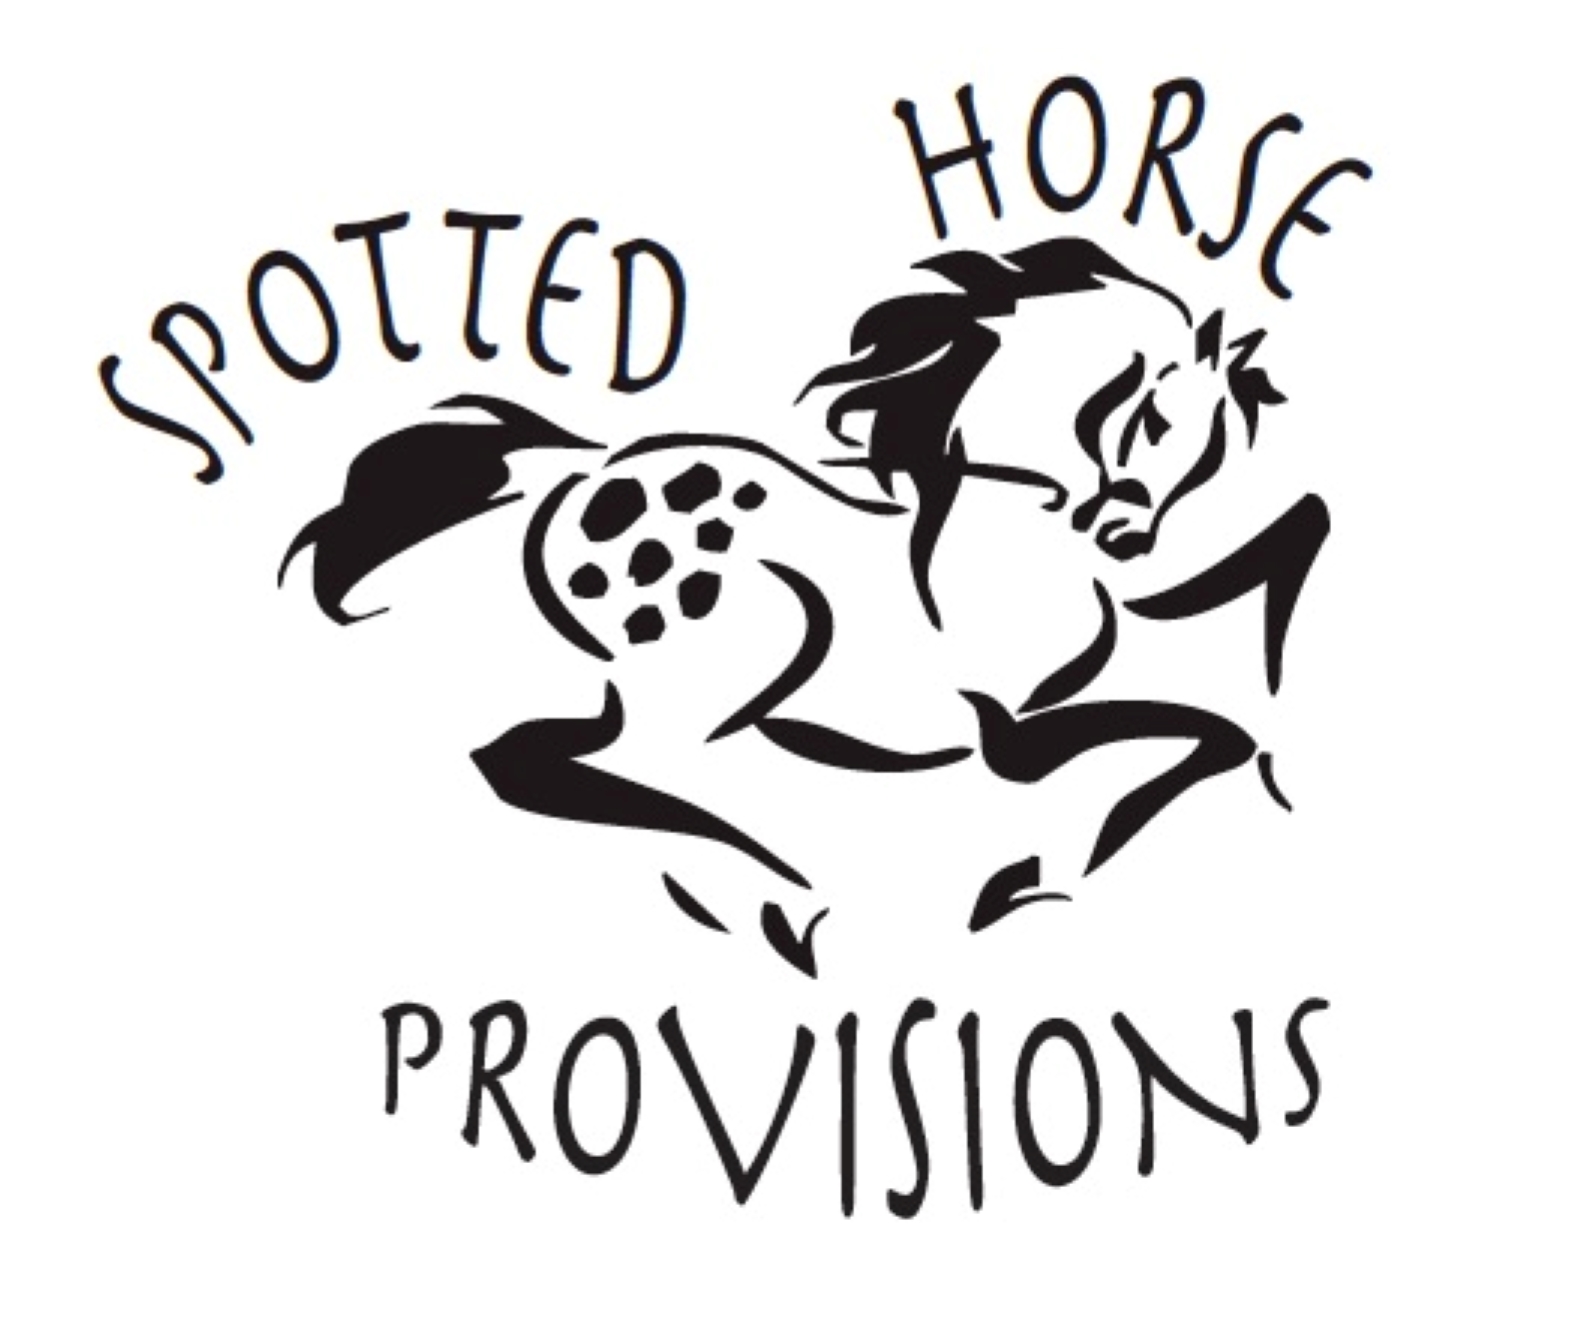 Spotted Horse Provisions